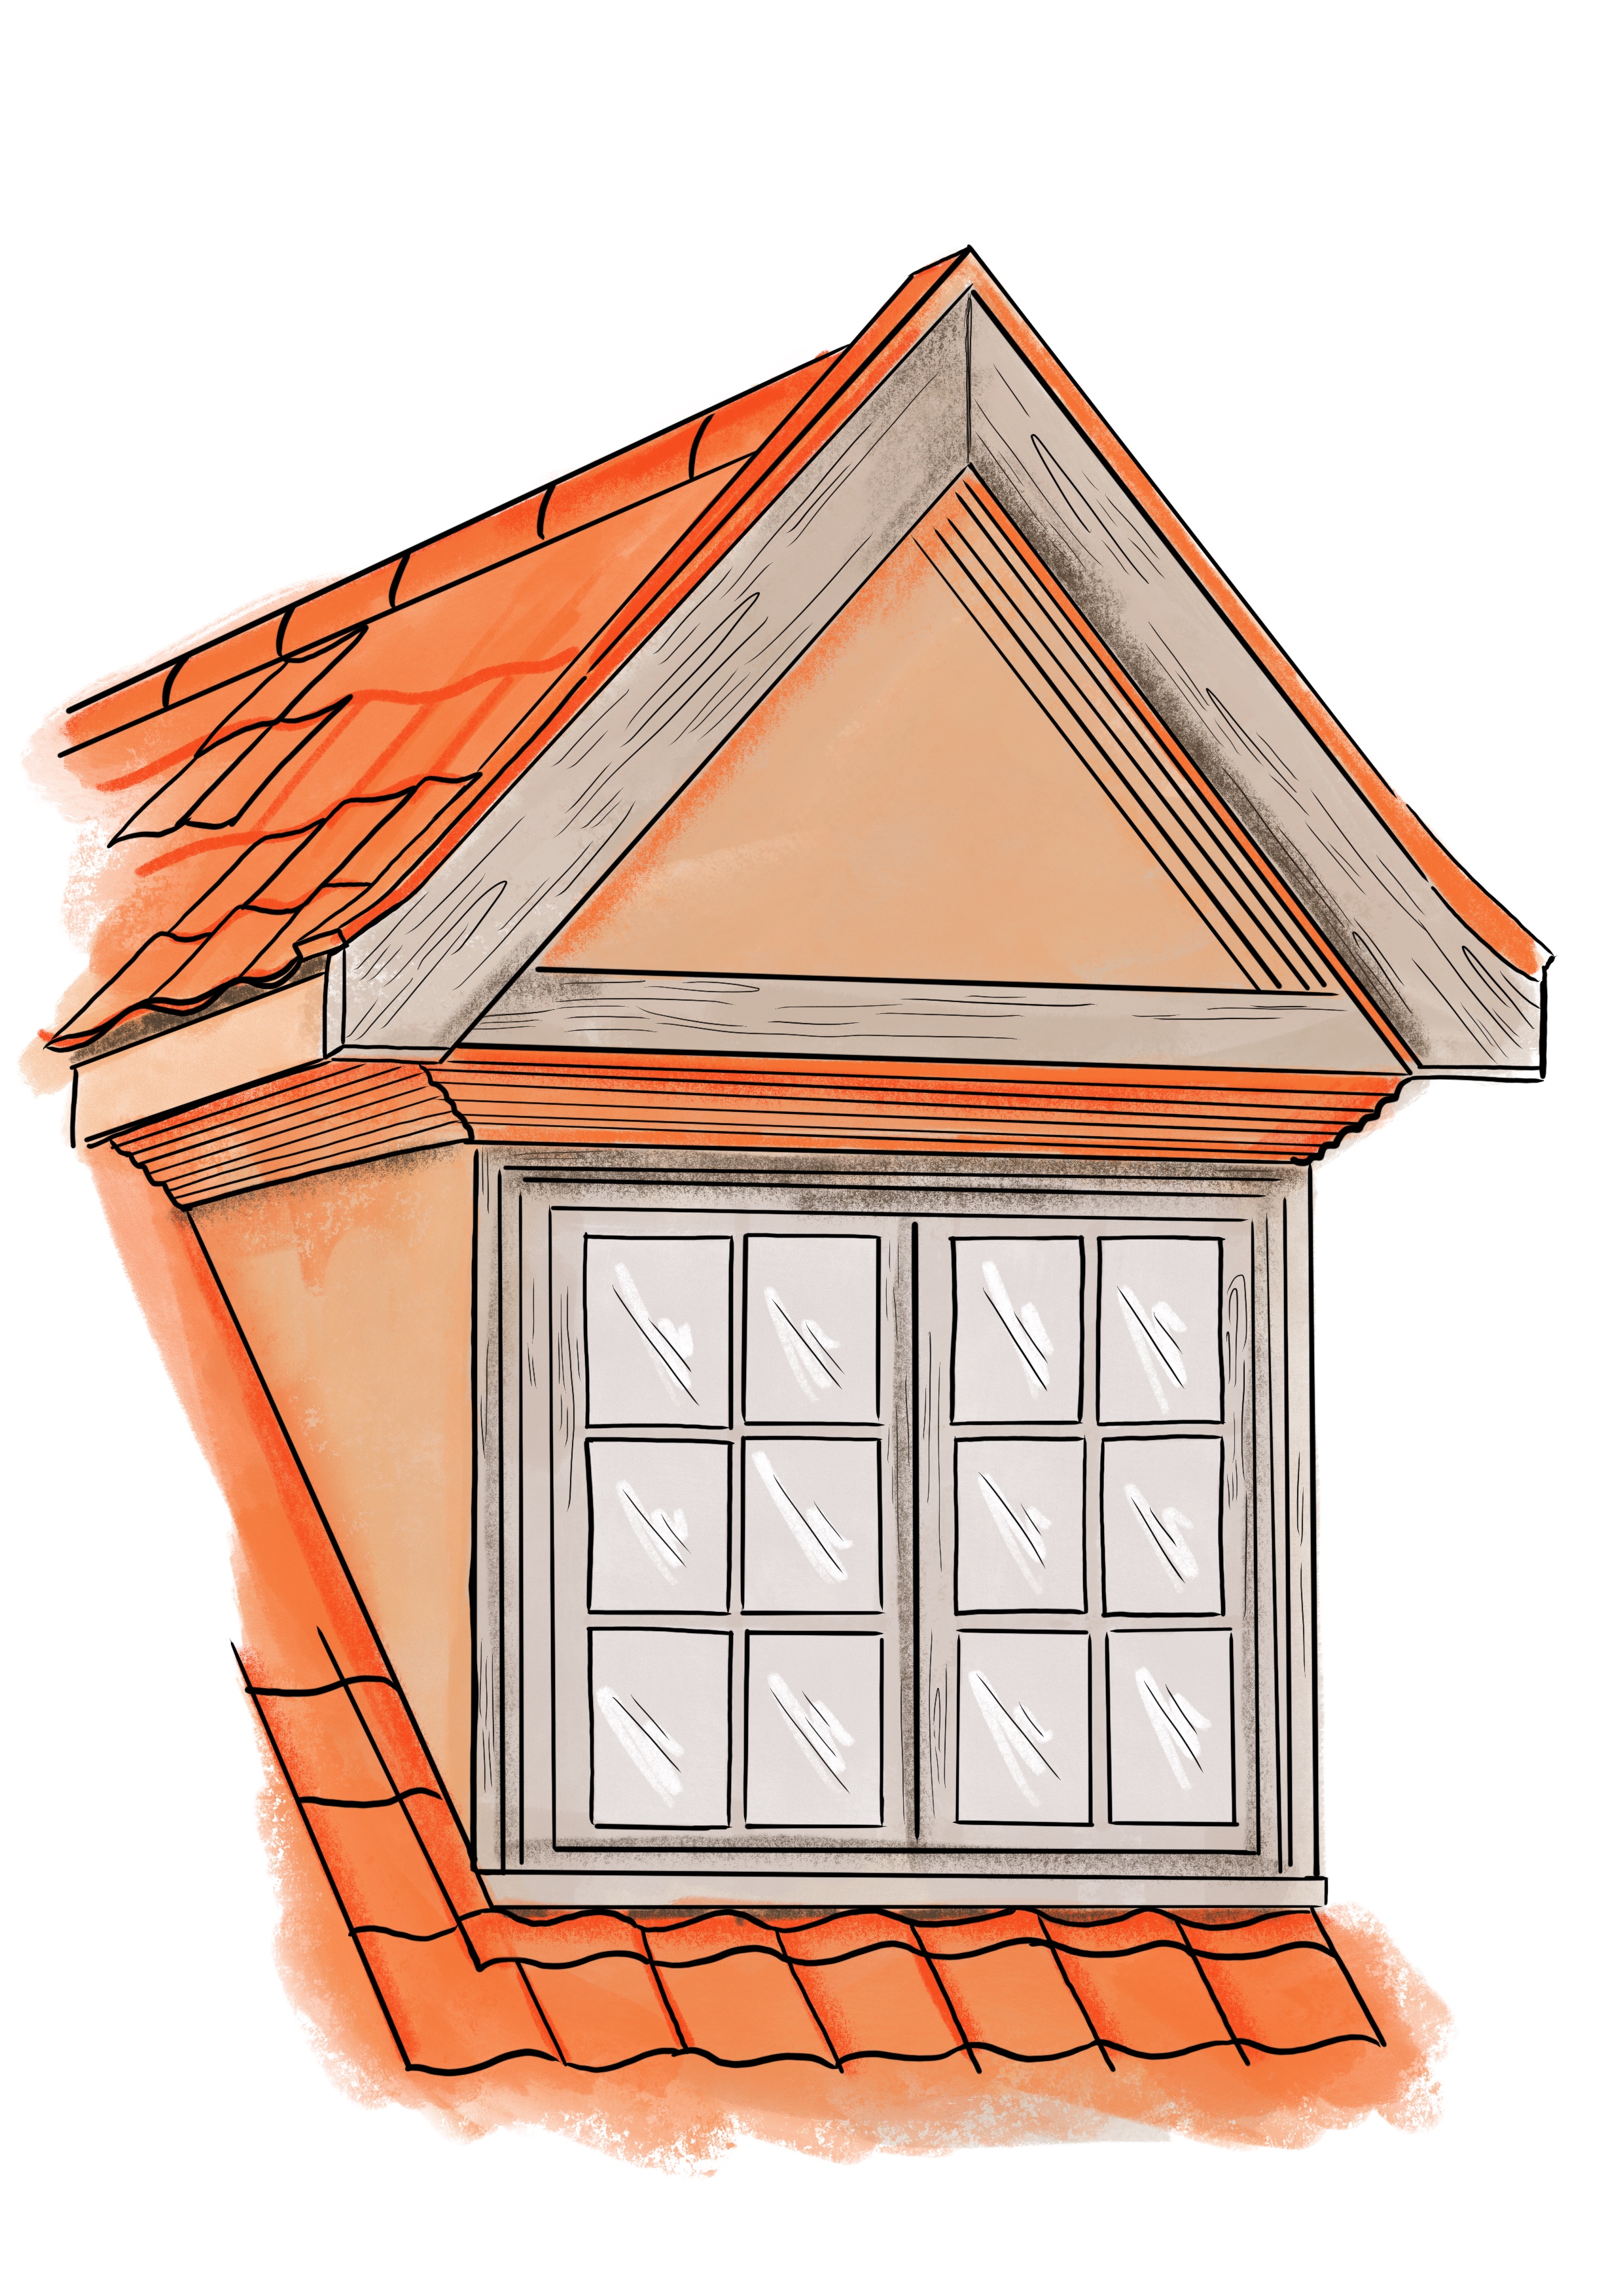 Classical 18th century dormer - usually found on larger houses.